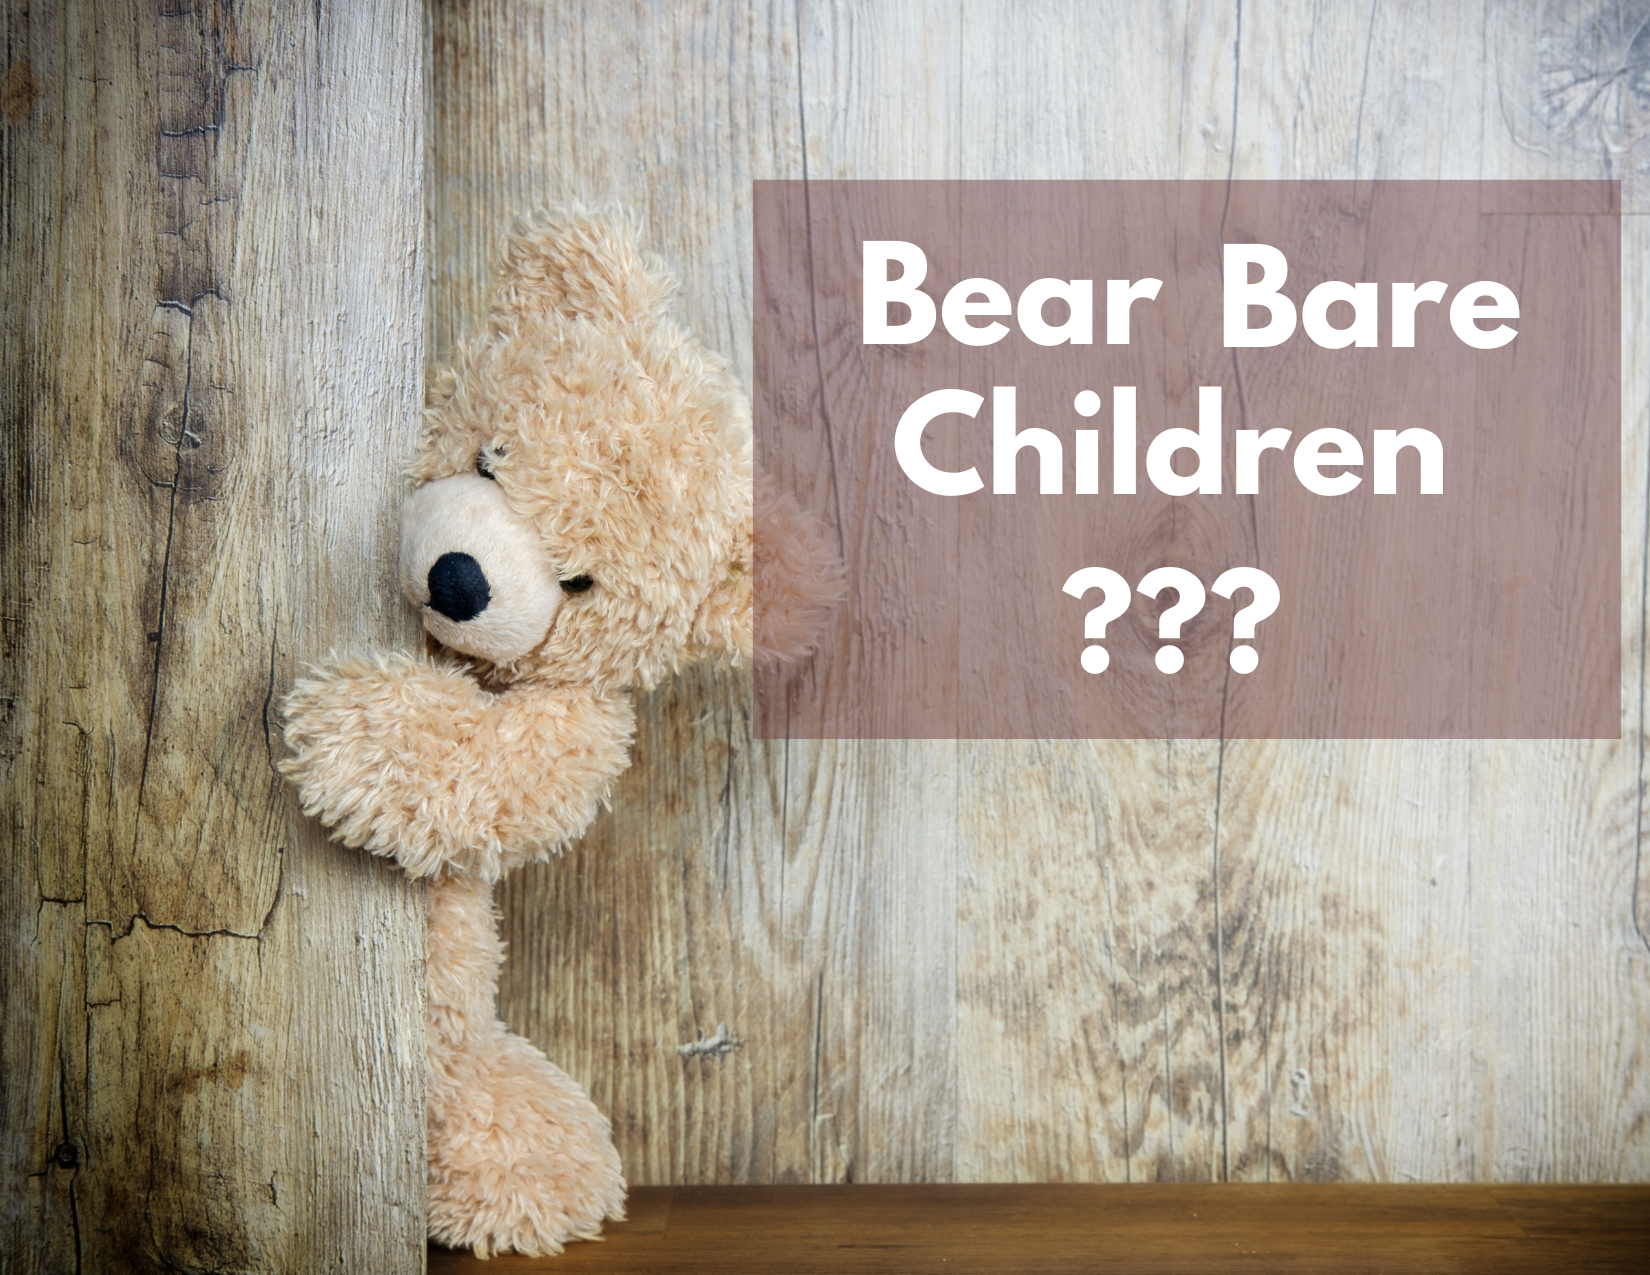 A picture of a teddy bear peeking out from behind a wall with the words "Bear or Bare Children"